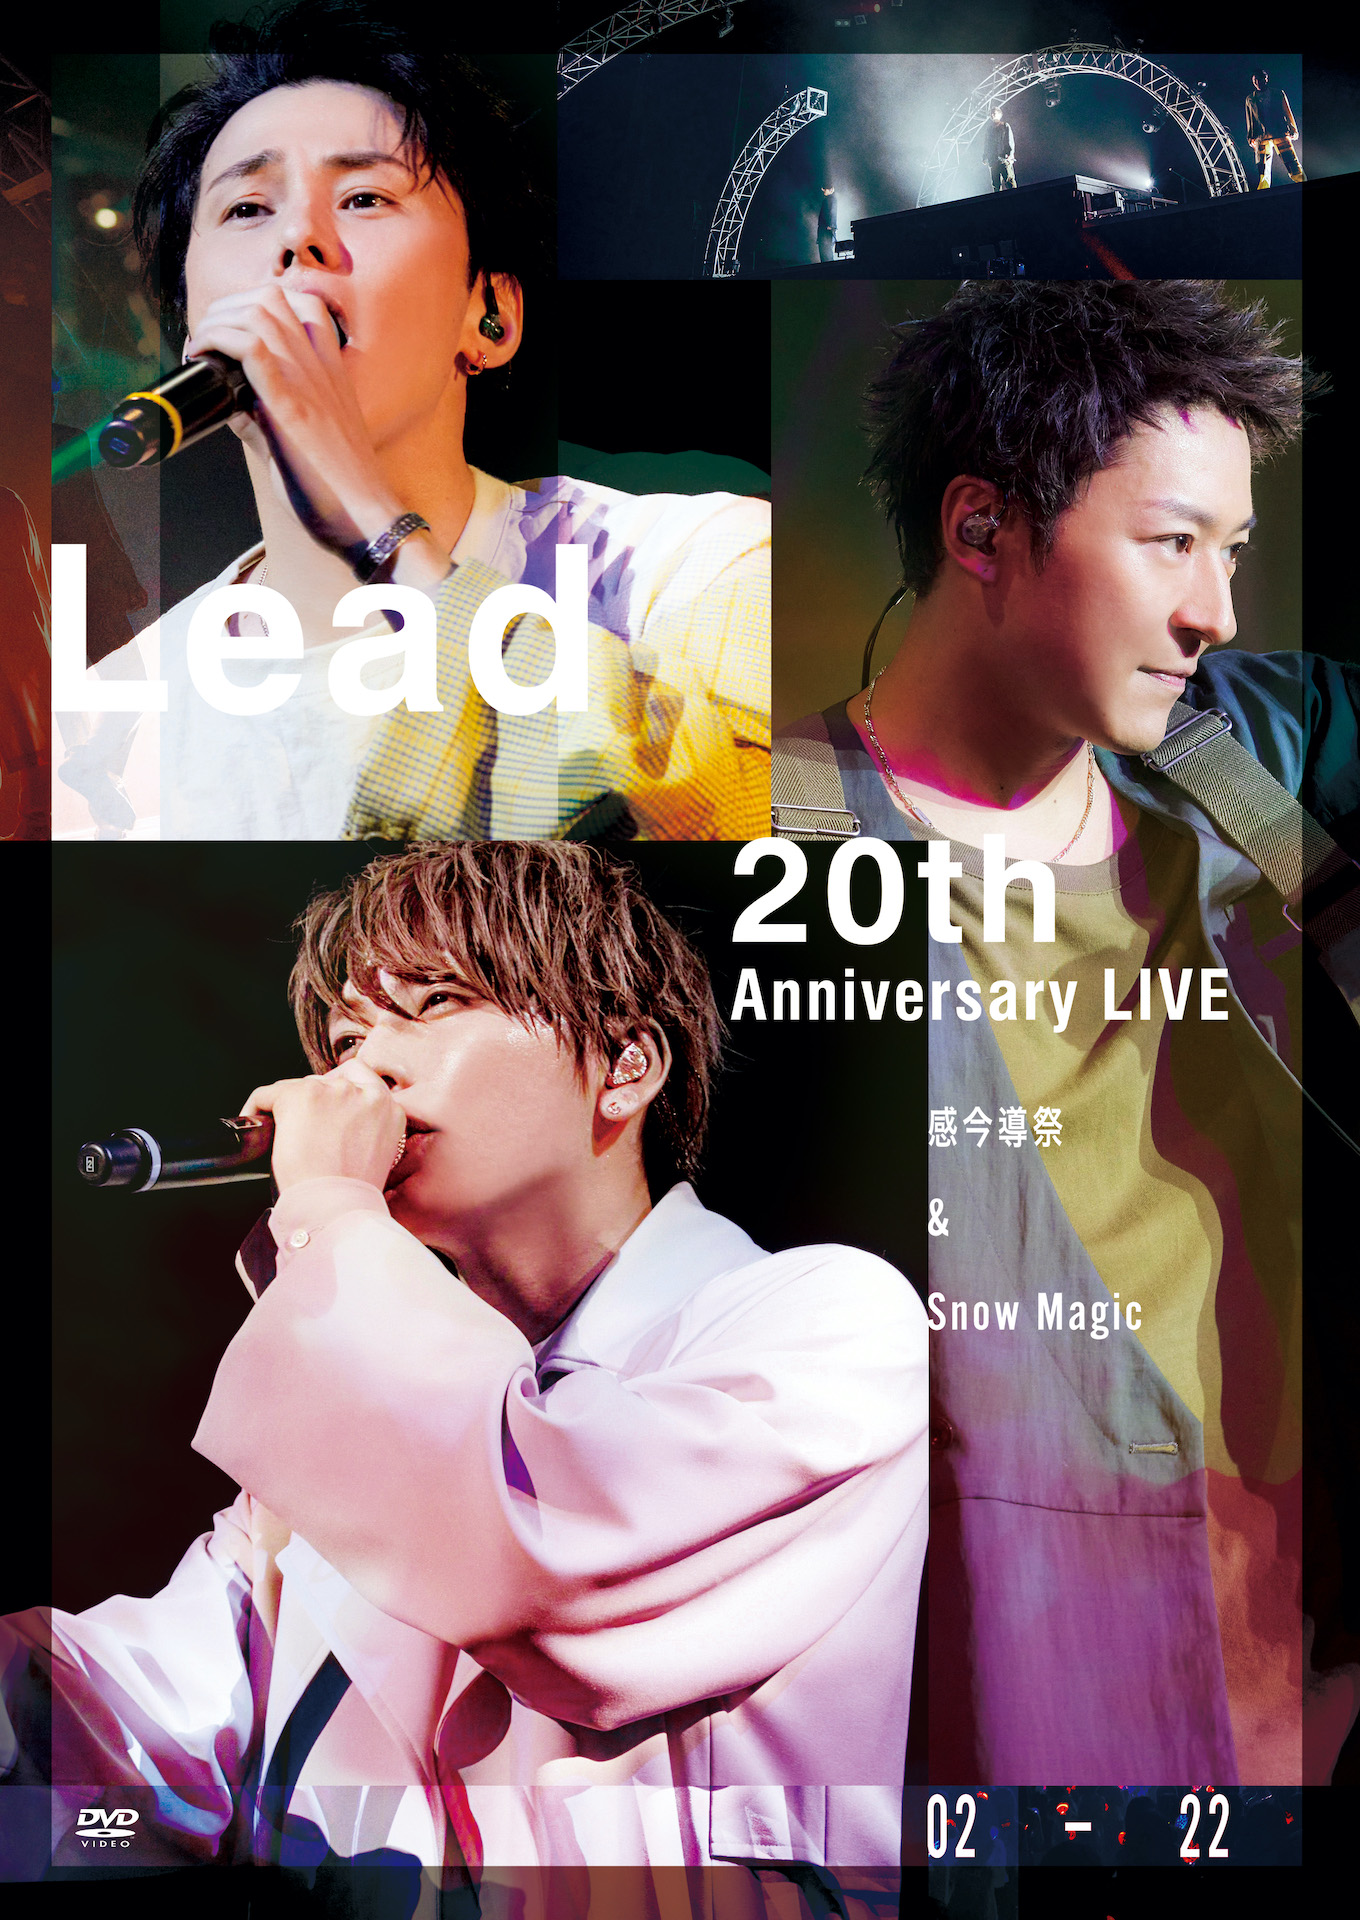 "Lead 20th Anniversary Live ~KANKONDOUSAI & Snow Magic~" Normal Edition (2DVD) Release on March 22th, 2023 No.1